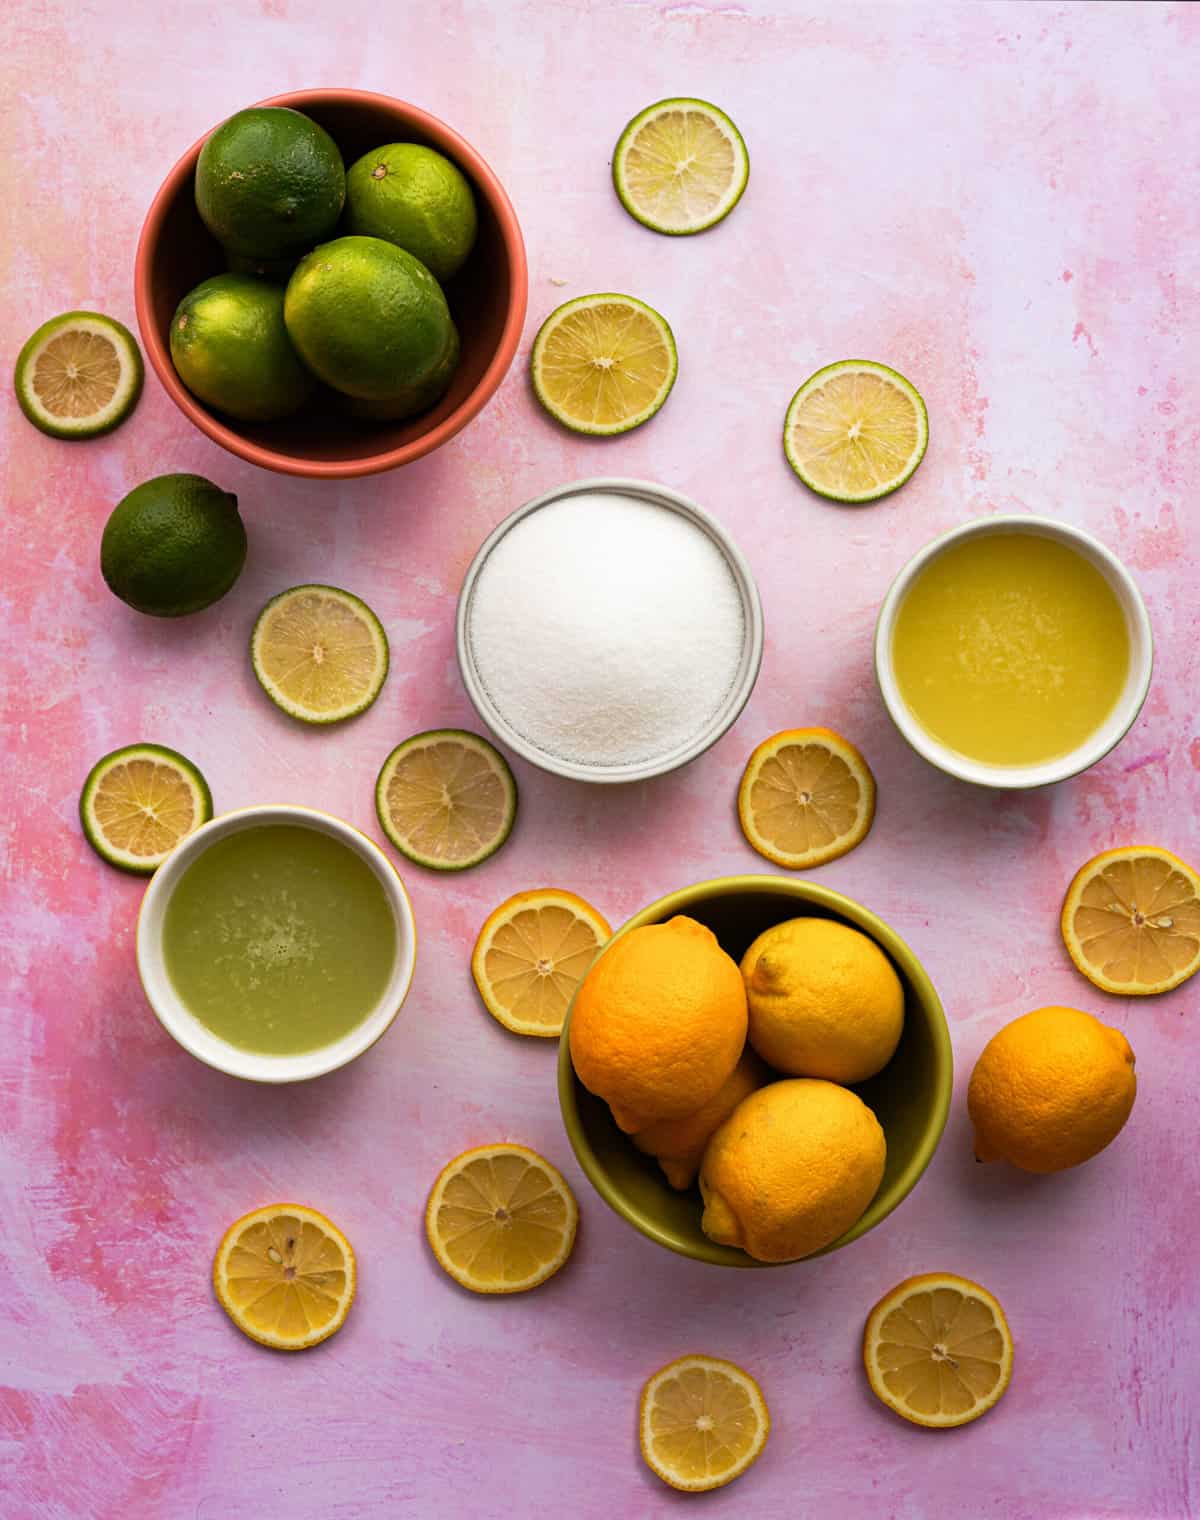 round slices of lemons and limes are scattered on a countertop alongside the rest of the ingredients to make a homemade sweet and sour mix recipe.